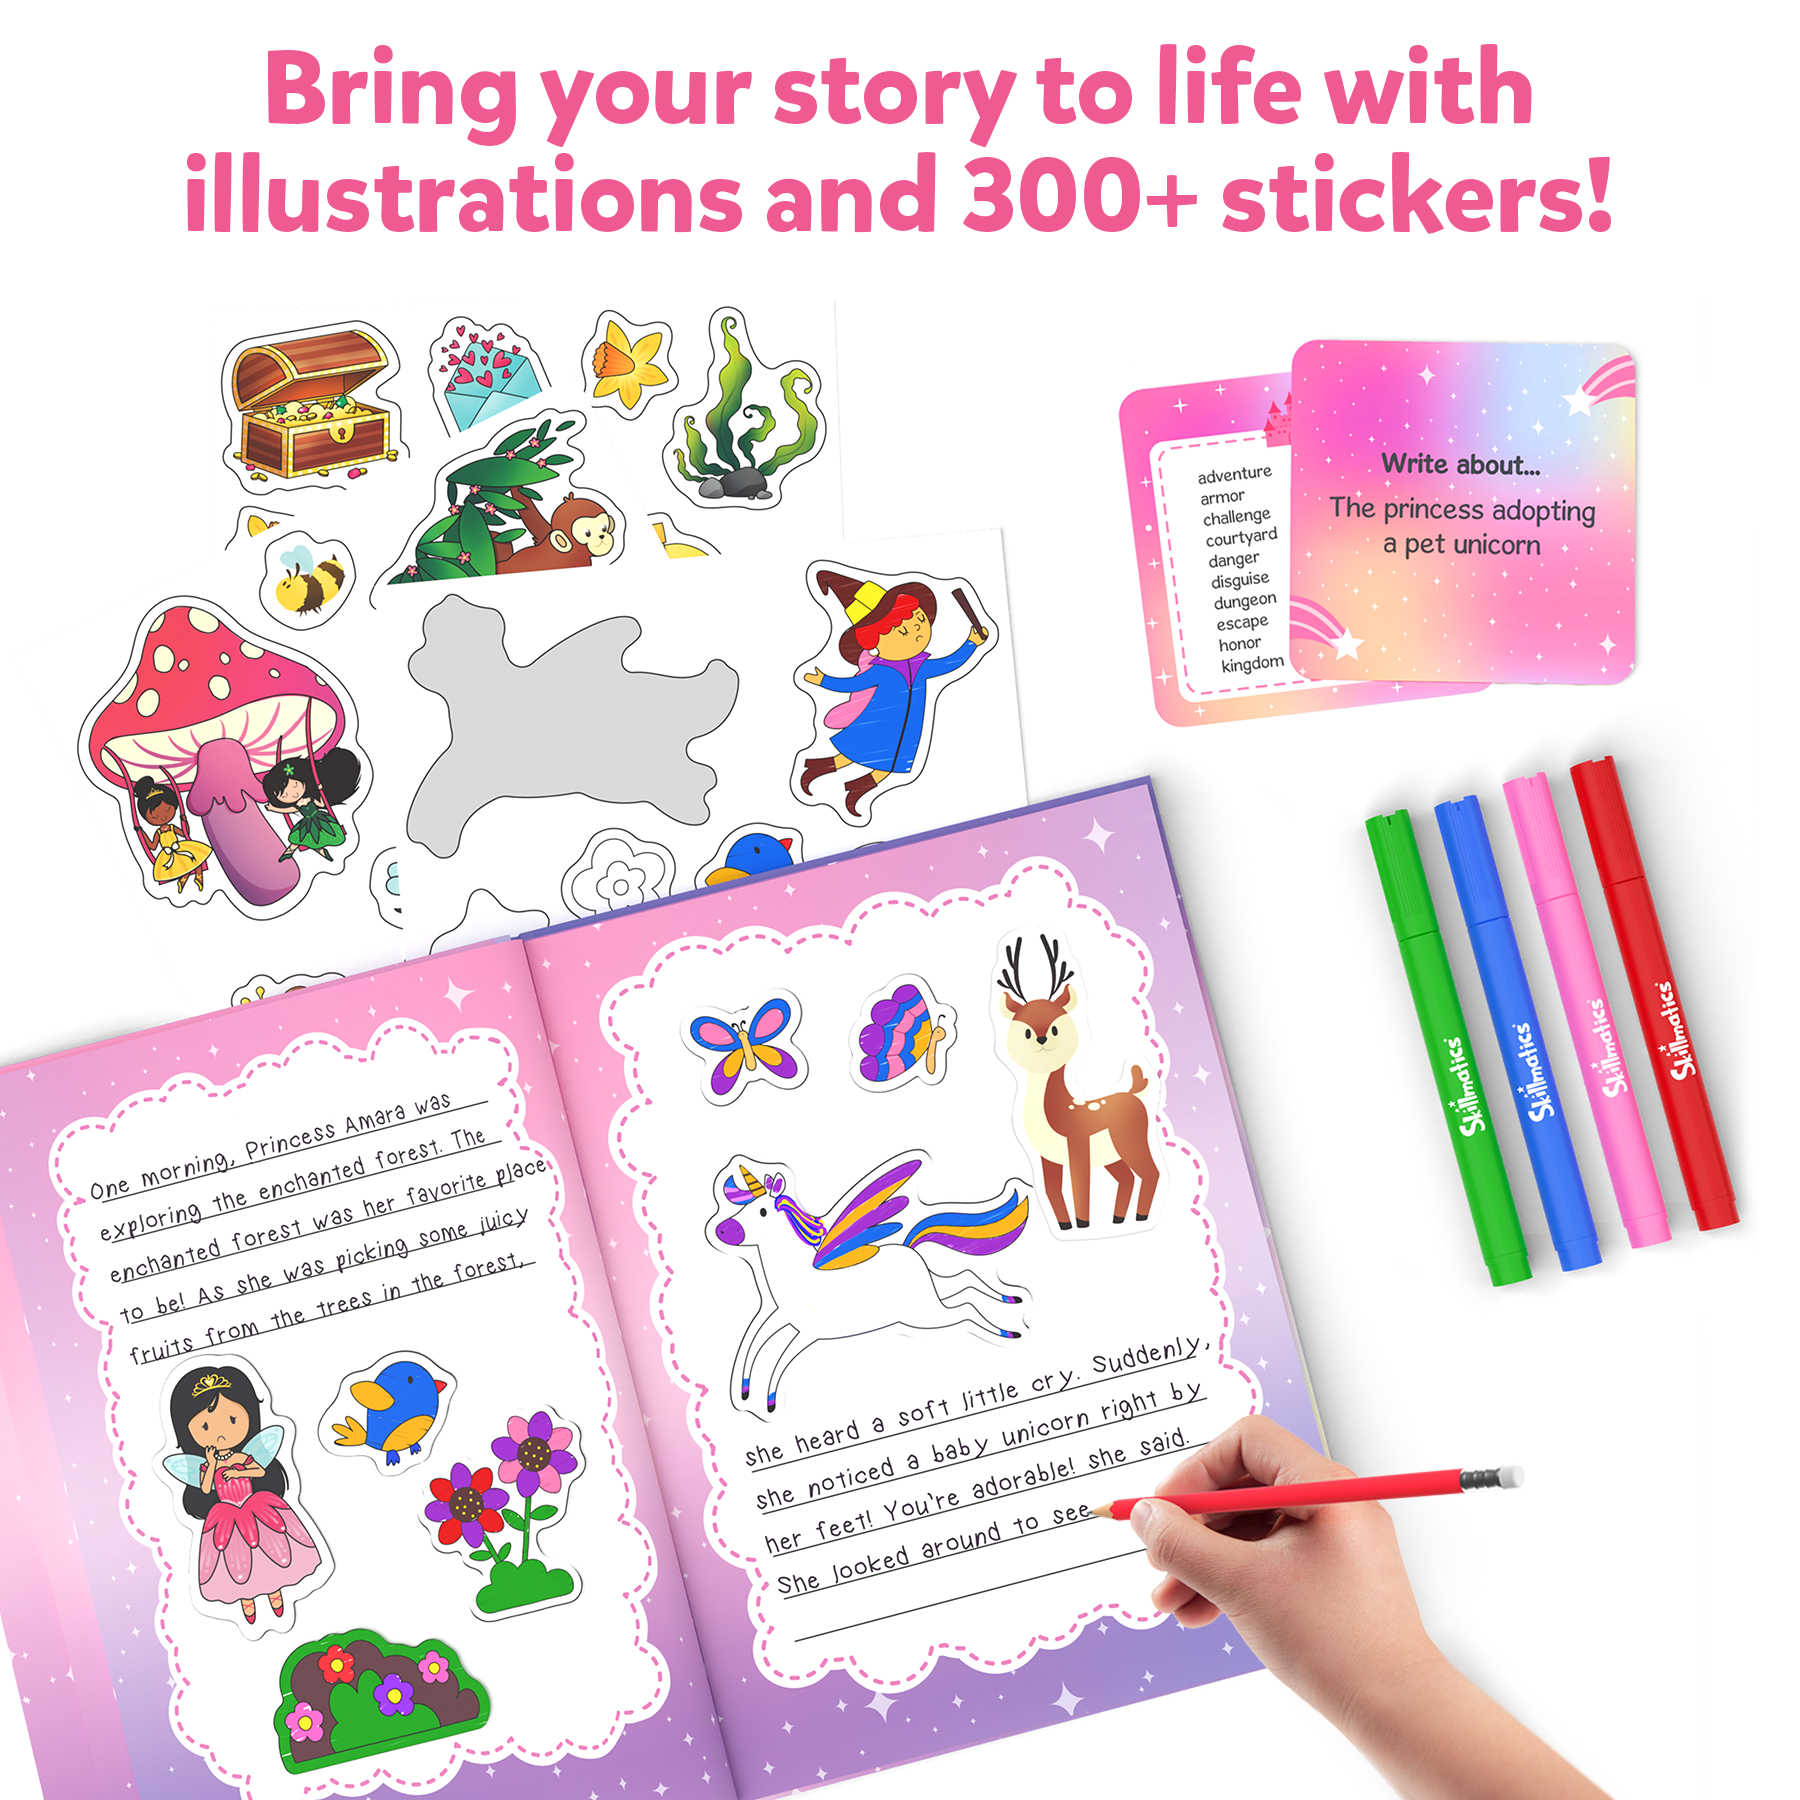 Skillmatics Storybook Art Kit - Unicorn & Princesses Art Kit for Kids, Write & Create Fairytale Storybooks, Creative Activity for Girls, DIY Kit, 150+ Stickers, Gifts for Ages 5, 6, 7, 8, 9, 10